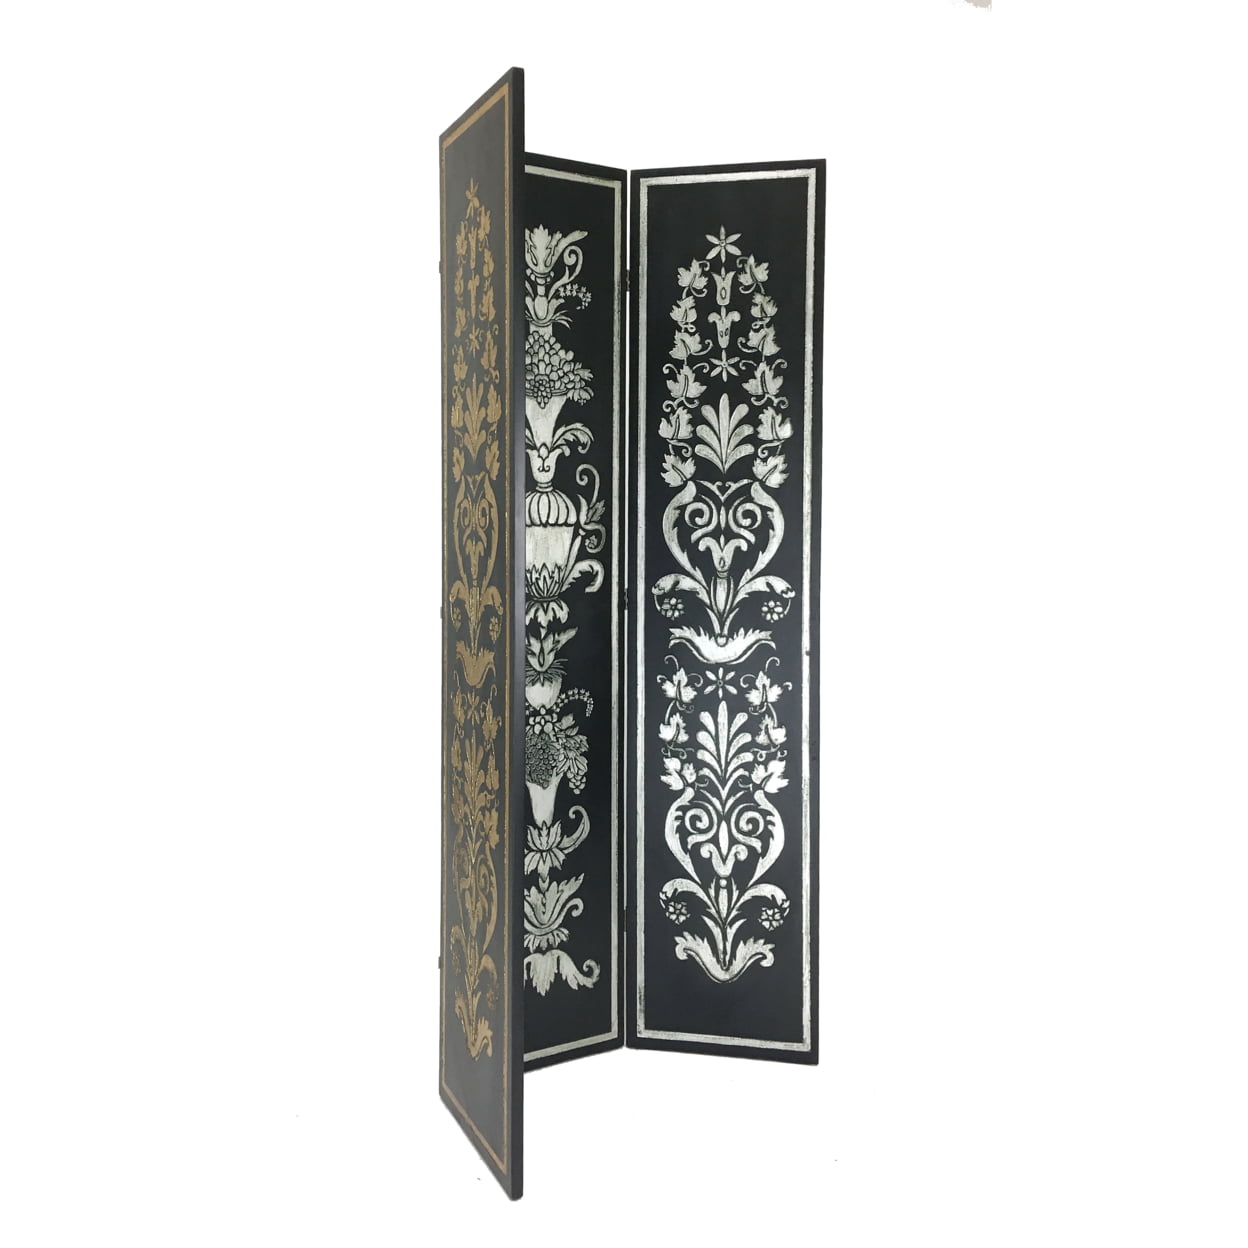 Picture of Benjara BM213494 Wooden Double Sided 3 Panel Room Divider with Motifs - Multi Color